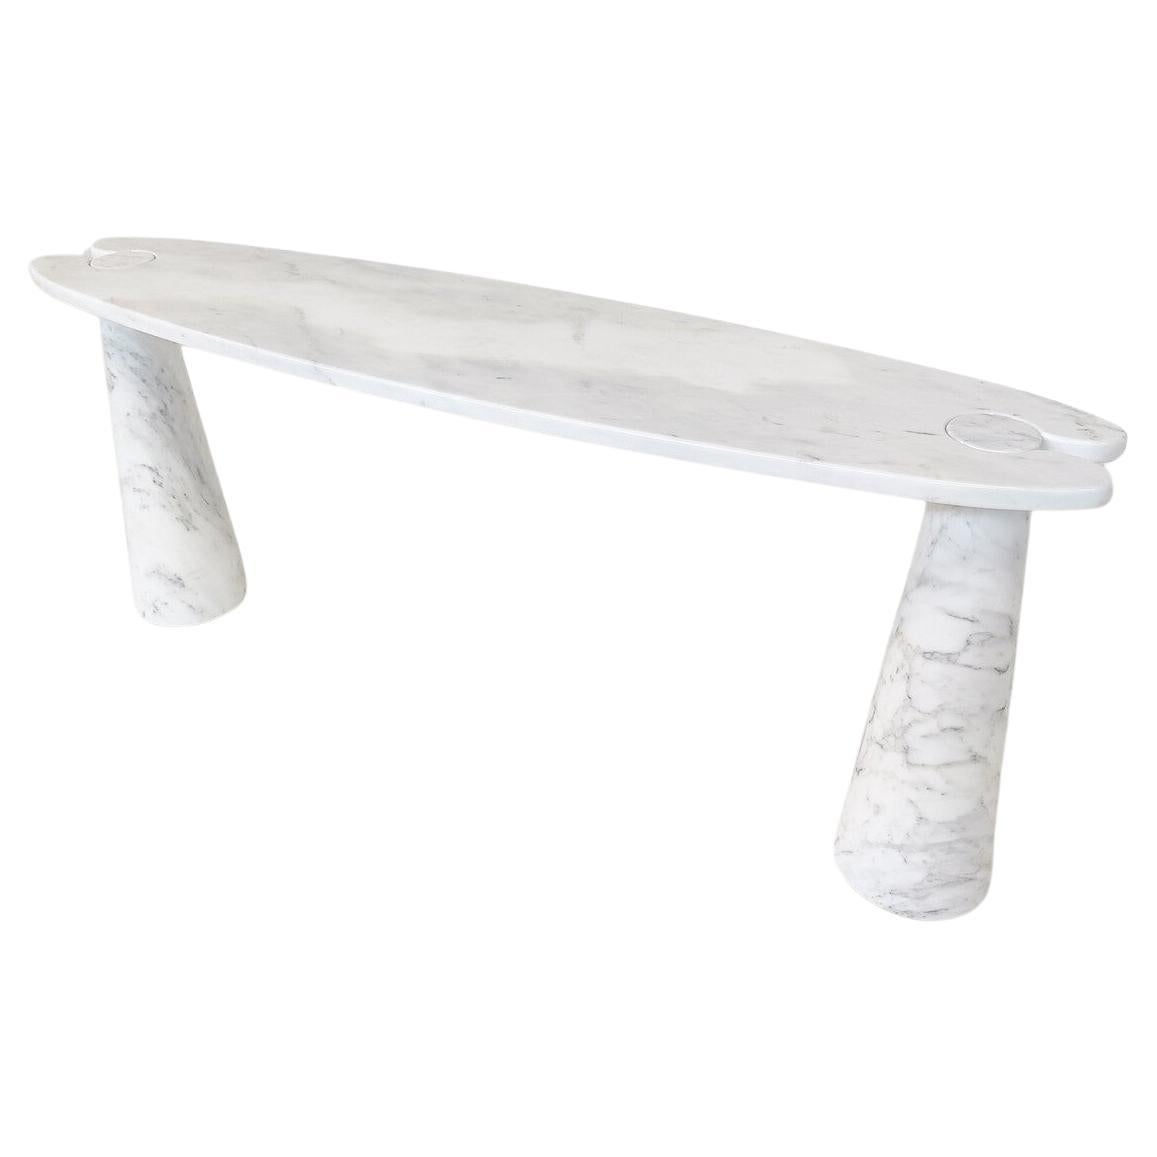 Midcentury Eros Console by Angelo Mangiarotti for Skipper, White Marble, 1980s For Sale